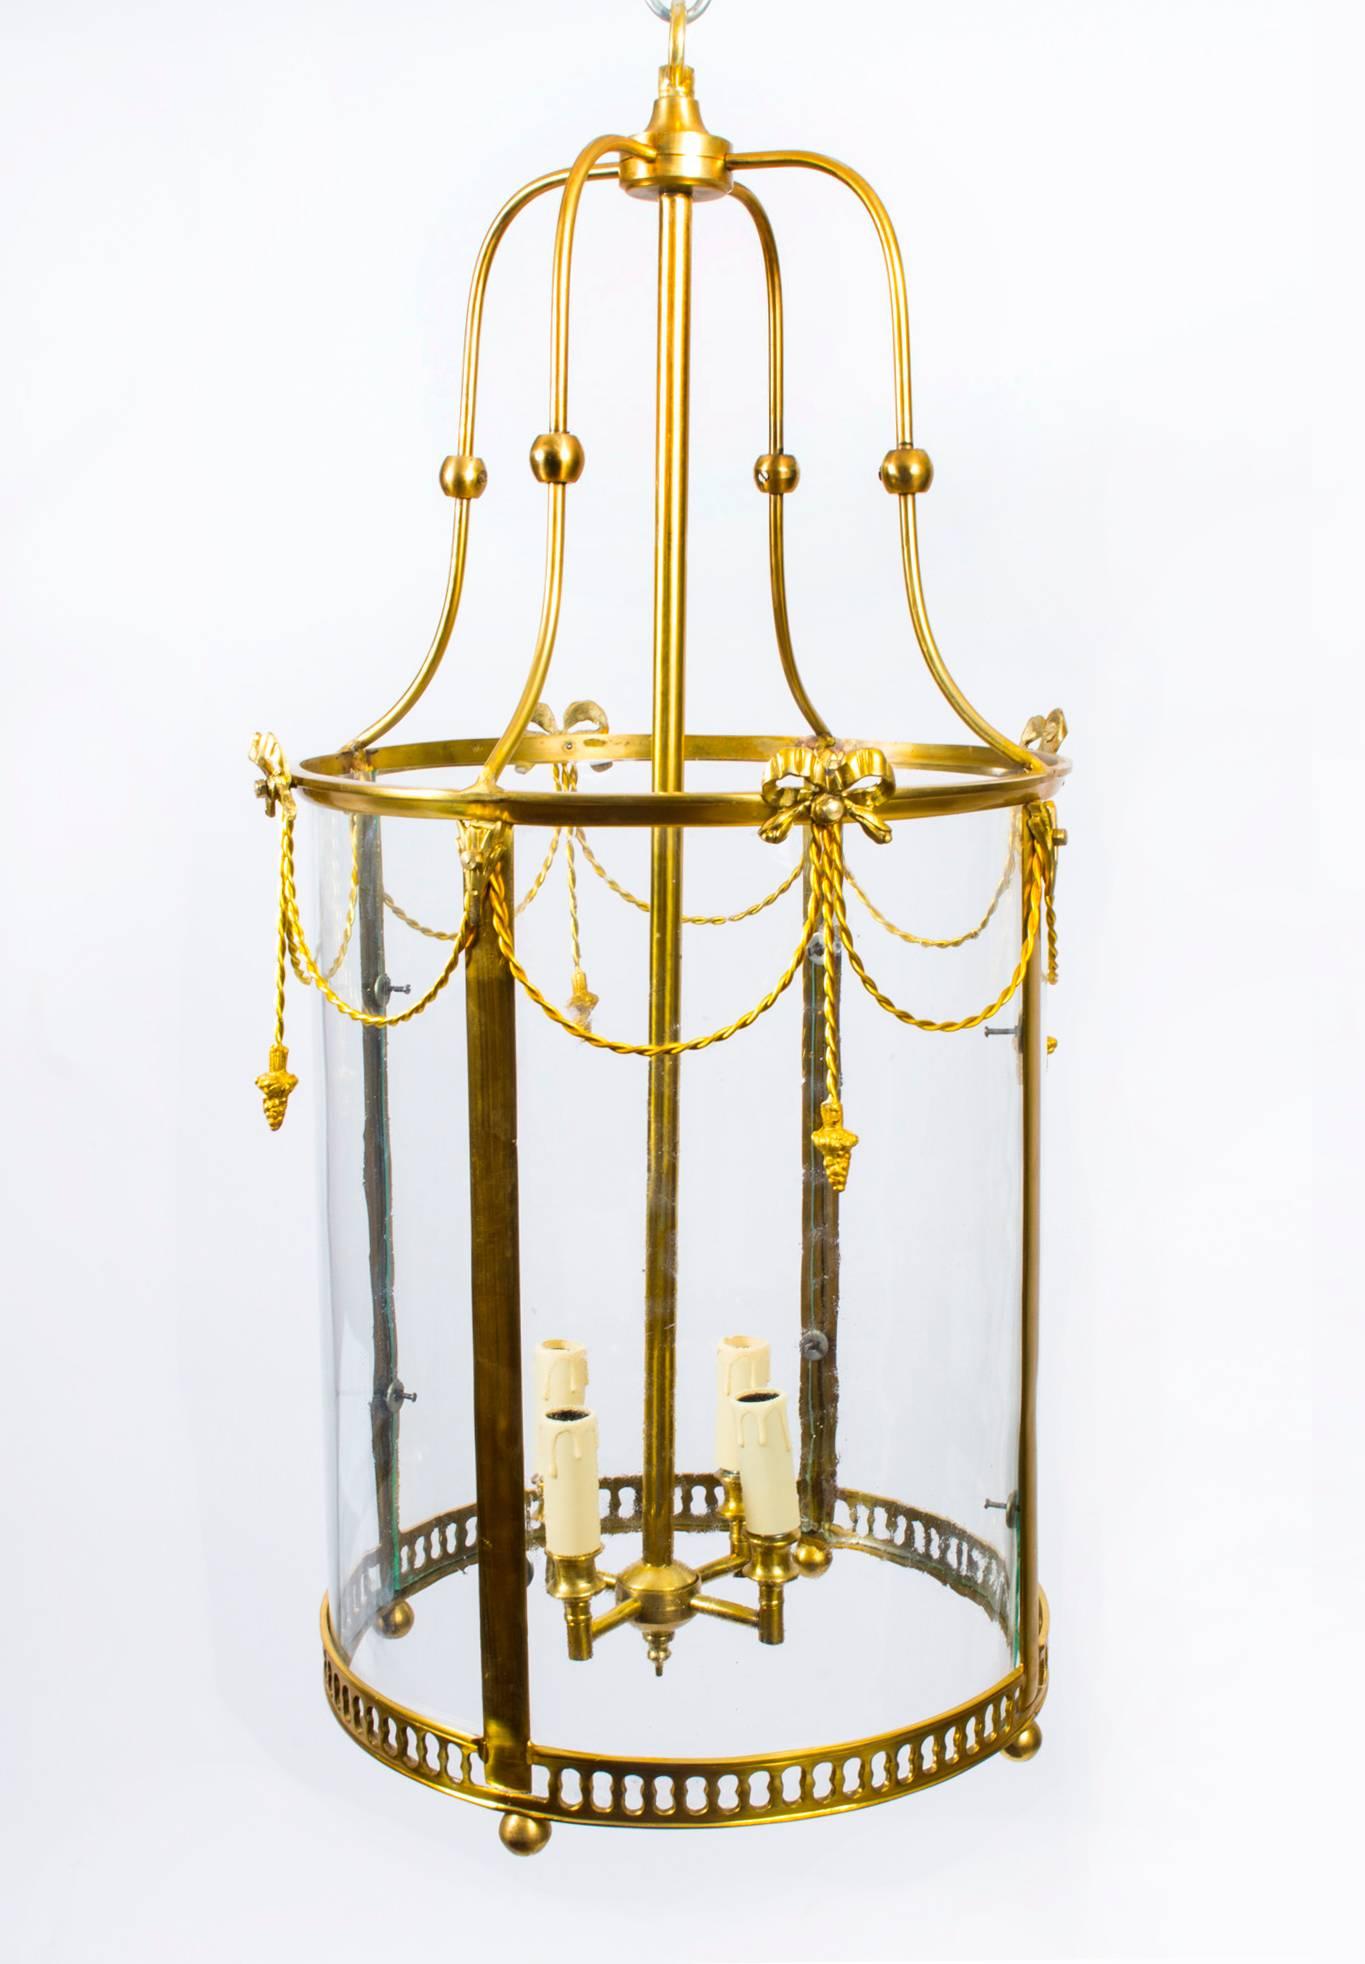 This is a stylish hall or entrance lantern made of solid brass with glazed sides in the elegant Sheraton style, dating from the last quarter of the 20th century.

The four light lantern's main frame has upper tasselled inserts, acorn decorative